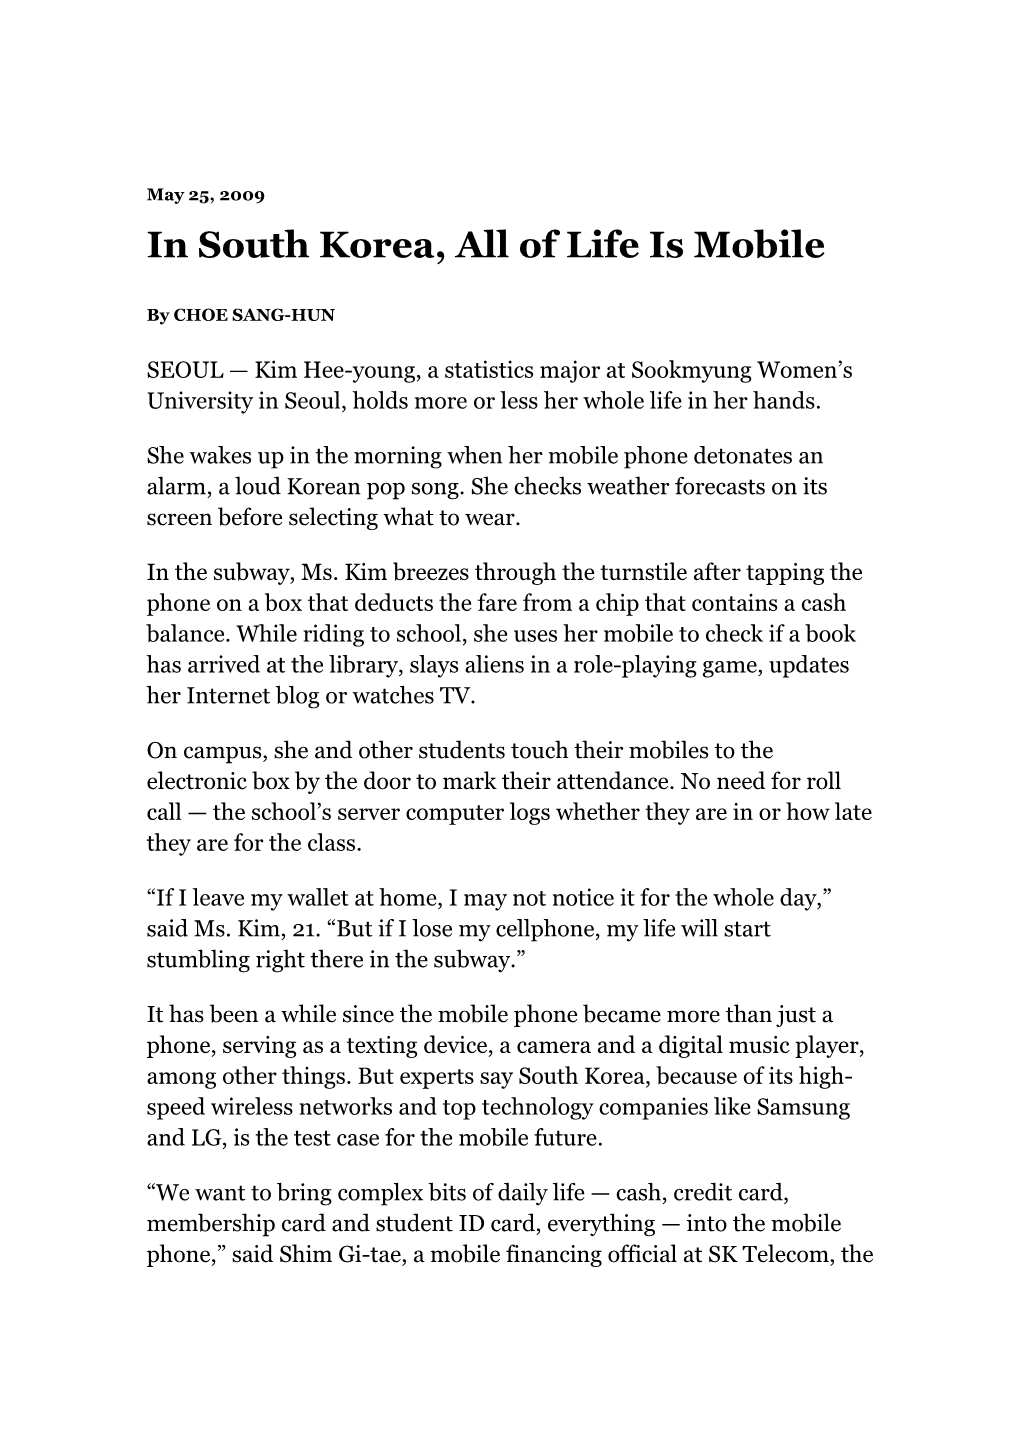 In South Korea, All of Life Is Mobile